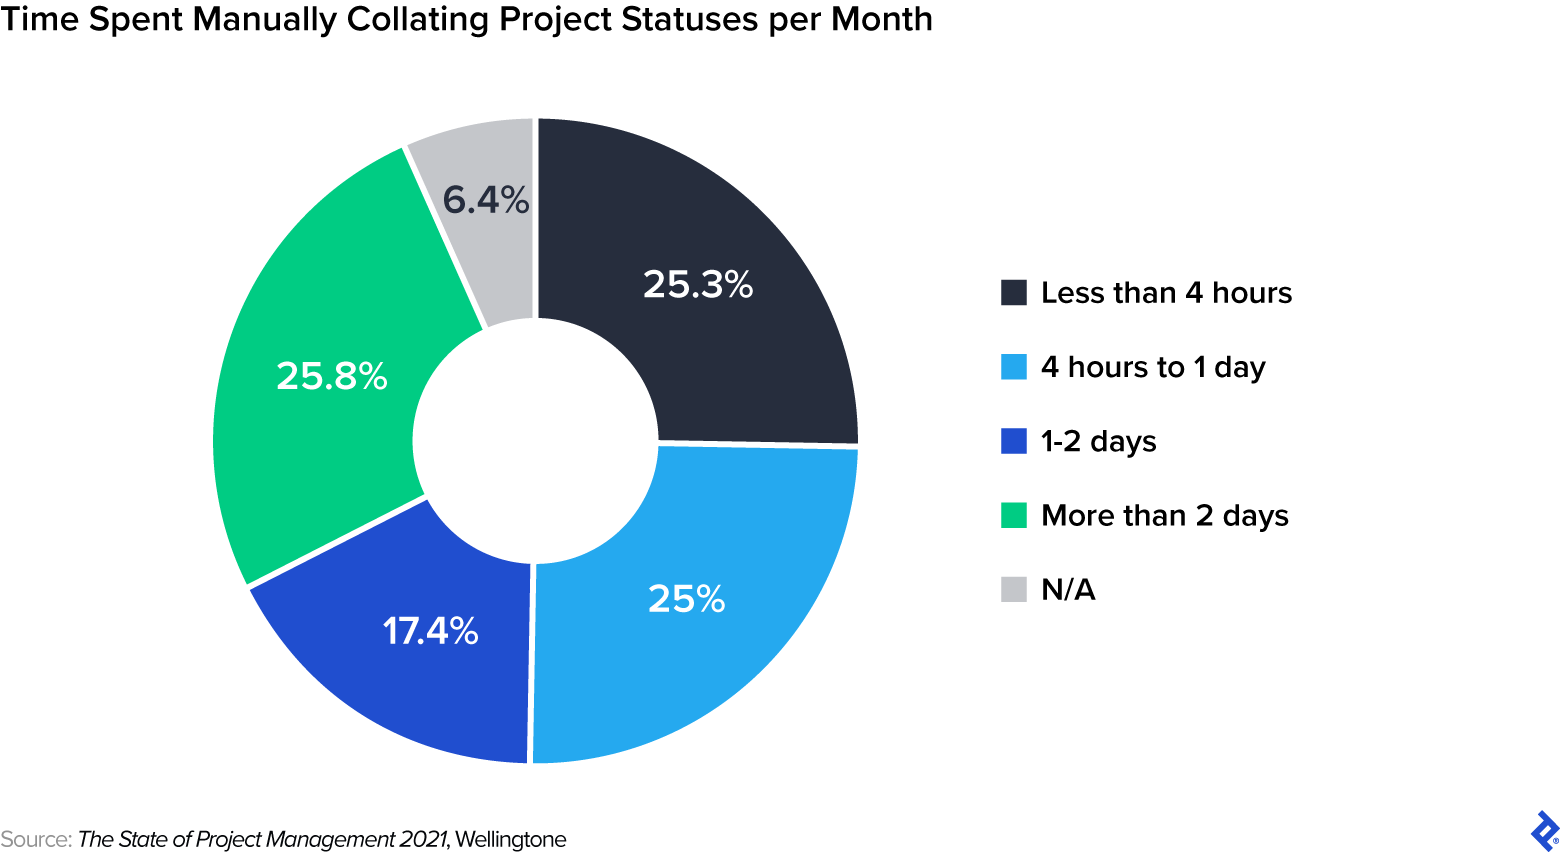 Time spent by project managers manually collating project statuses per month: less than 4 hours: 25.3%; 4 hours to 1 day: 25%; 1-2 days: 17.4%; more than 2 days: 25.8;, N/A: 6.4%.